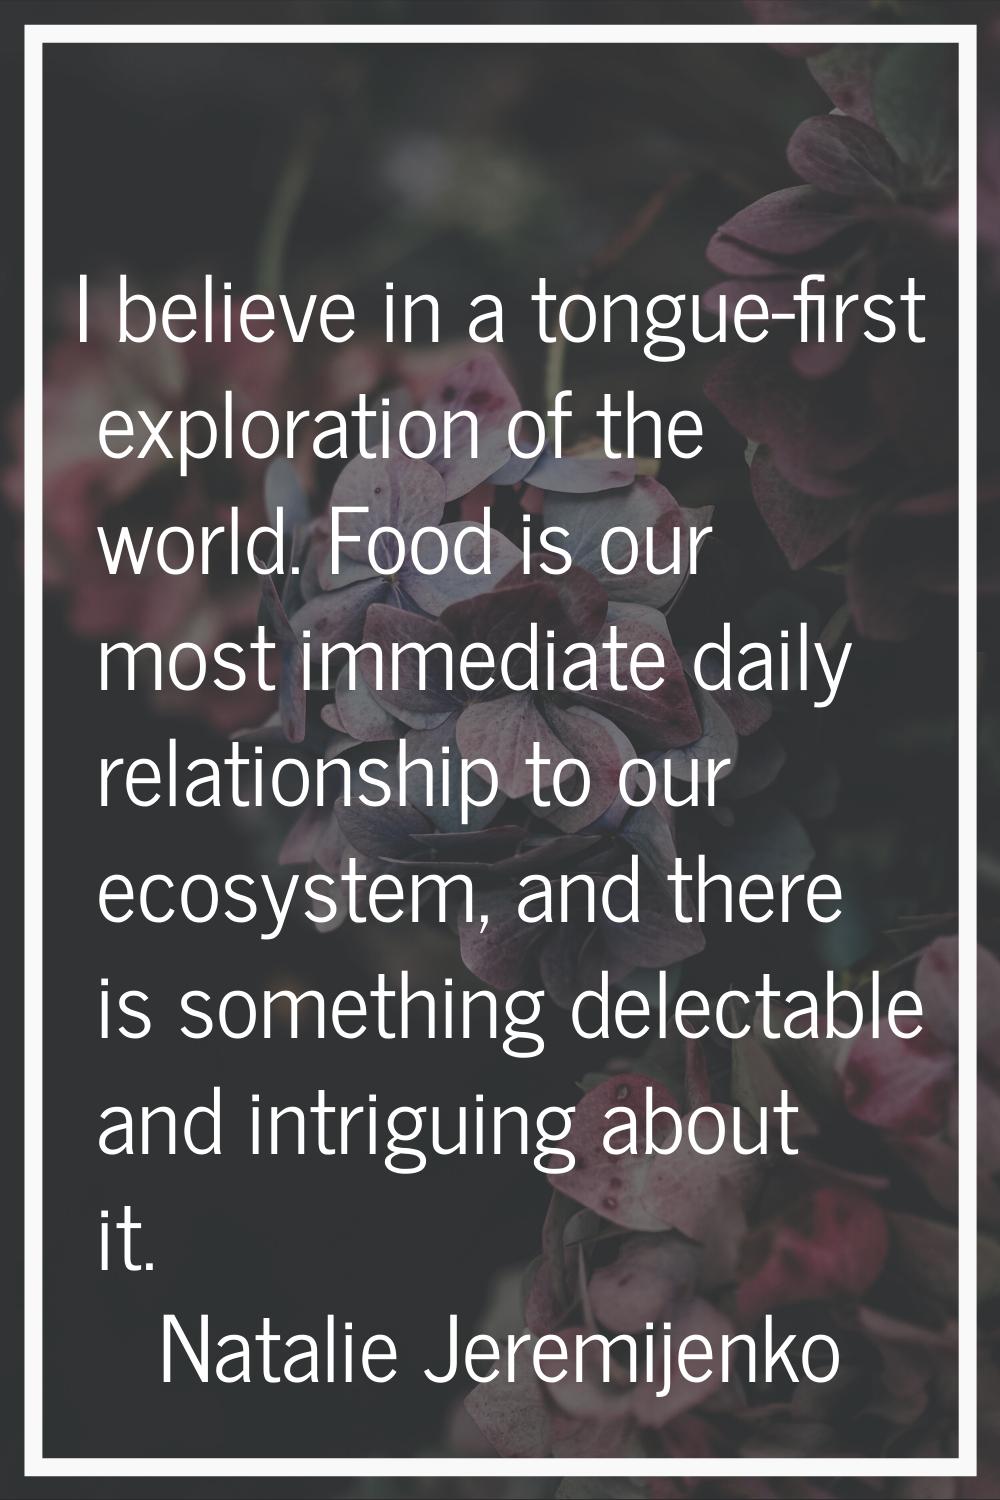 I believe in a tongue-first exploration of the world. Food is our most immediate daily relationship